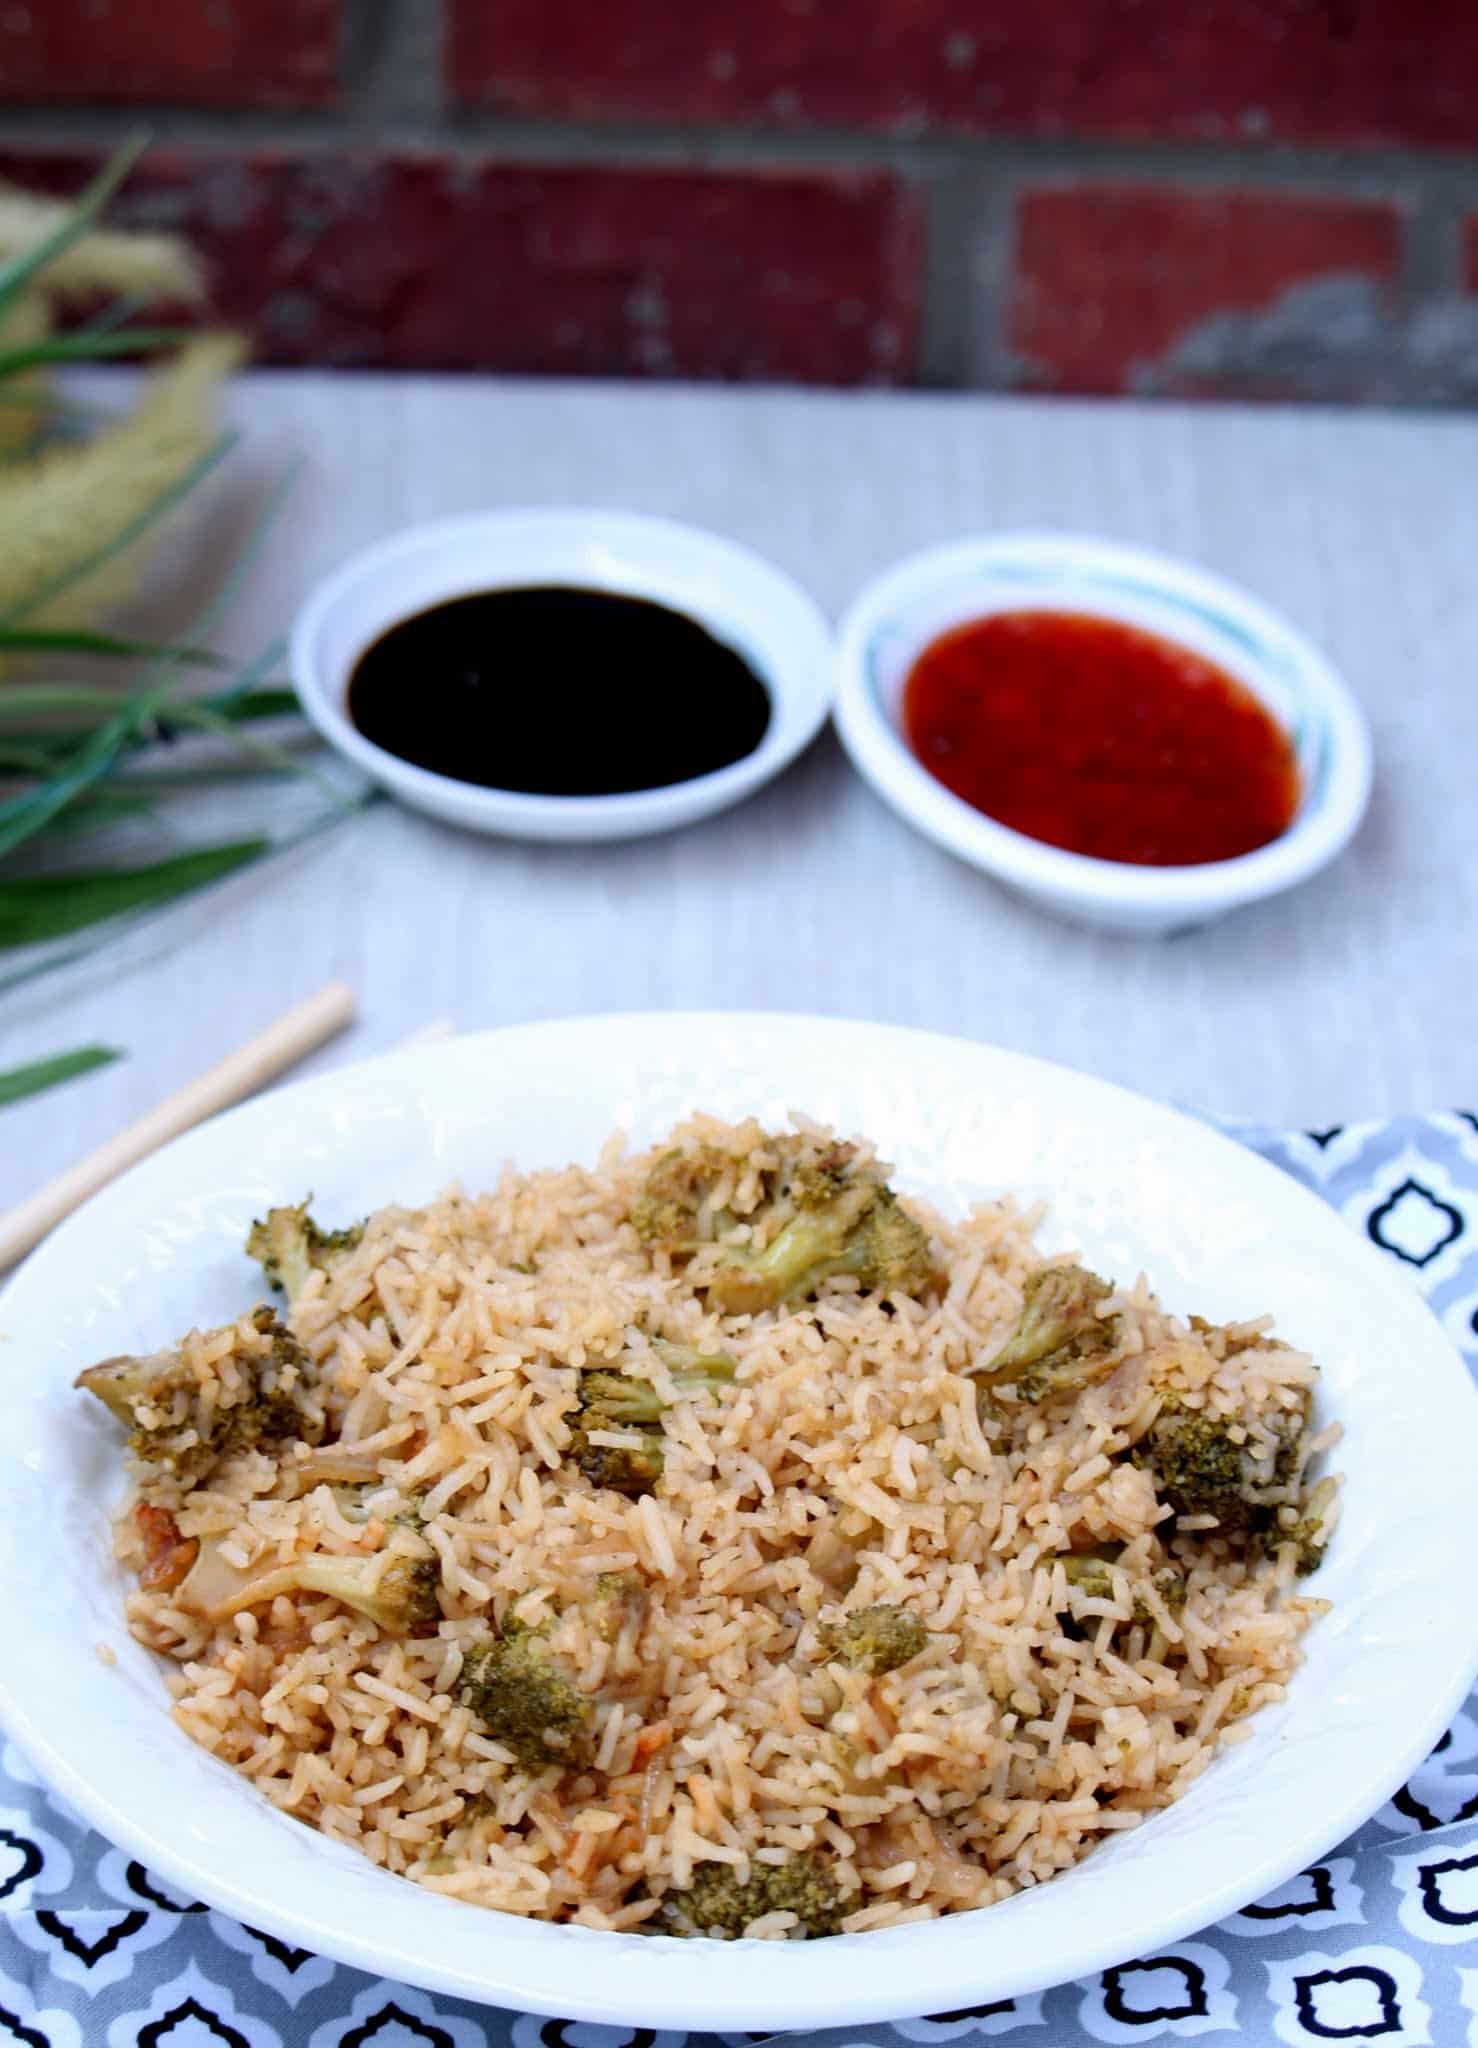 Broccoli Fried Rice with sauces on the side